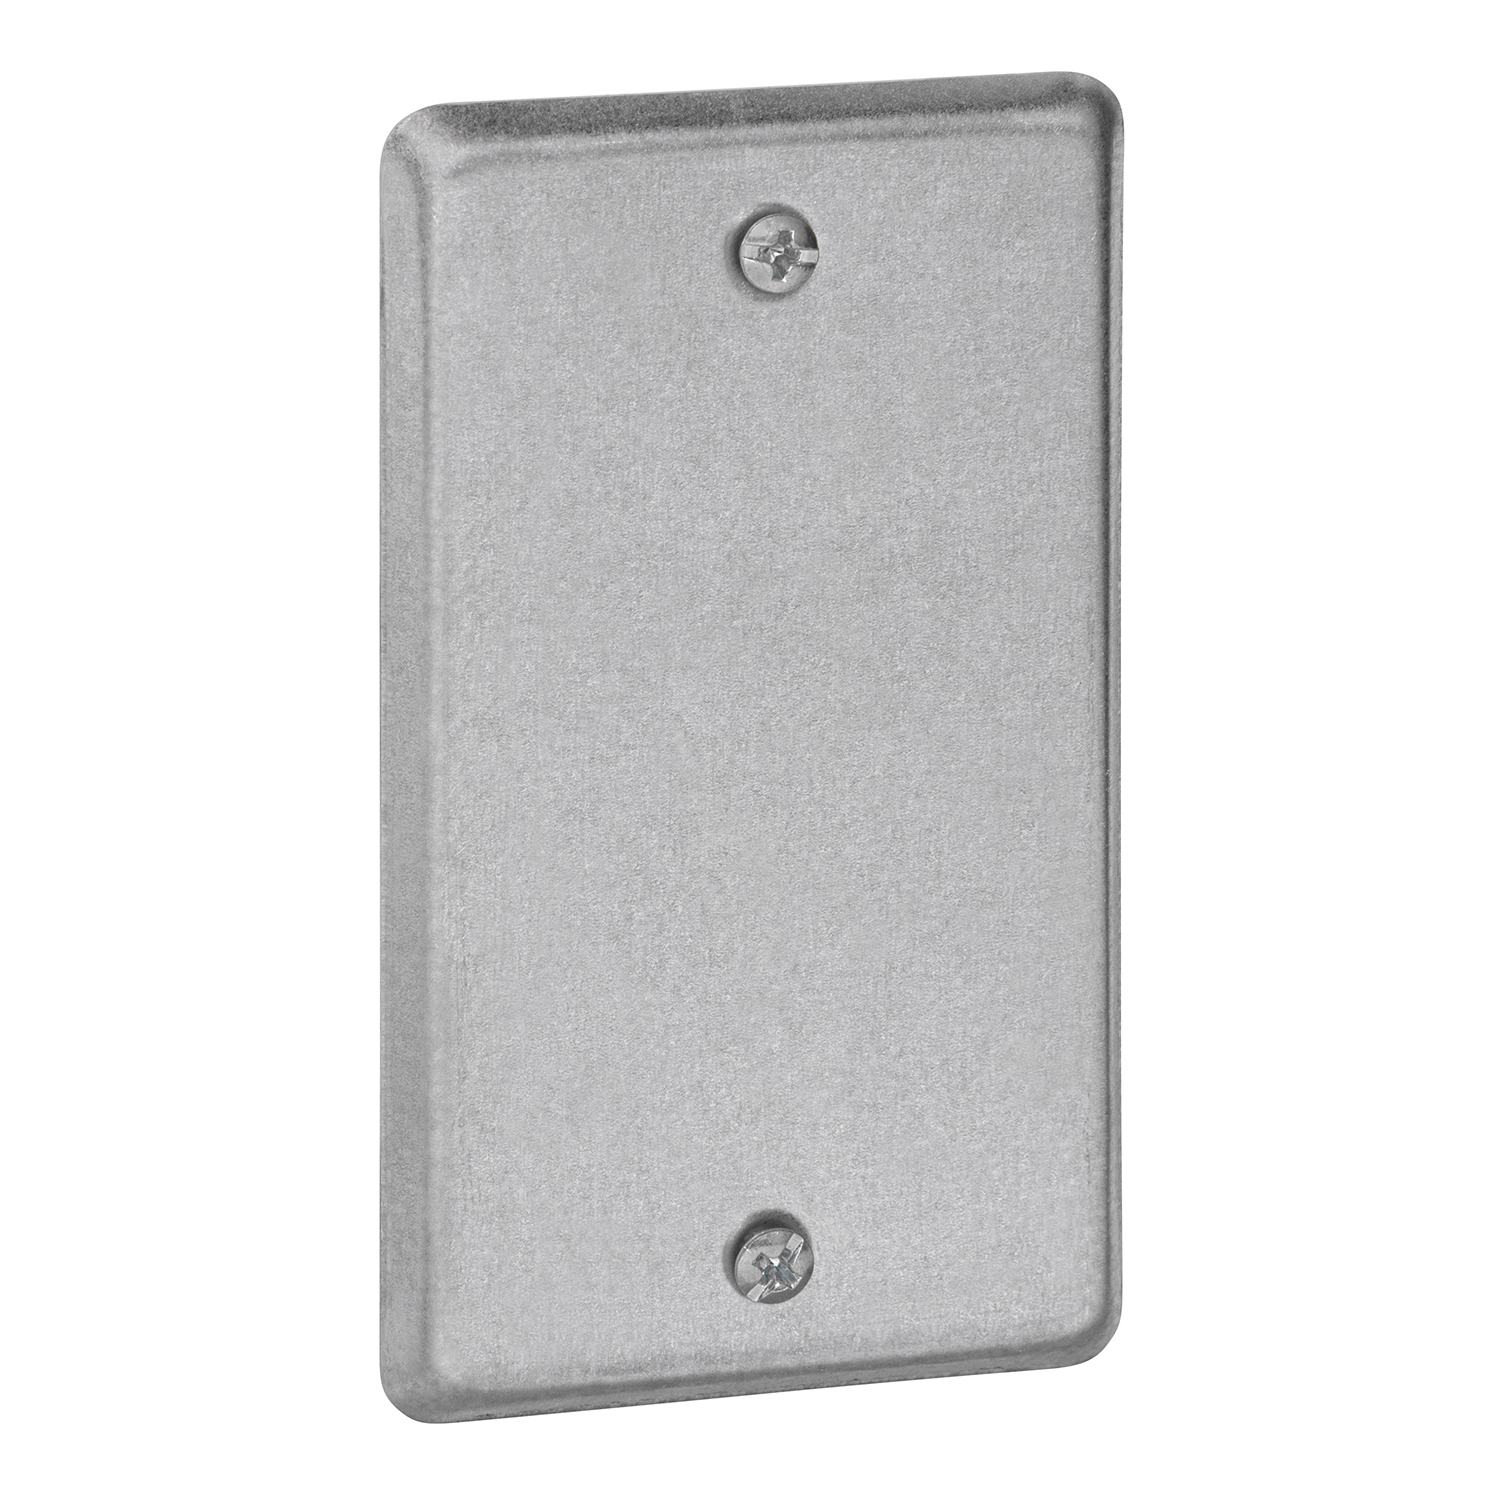 58C1 Utility Box Cover Thomas & Betts;ABB - Installation Products